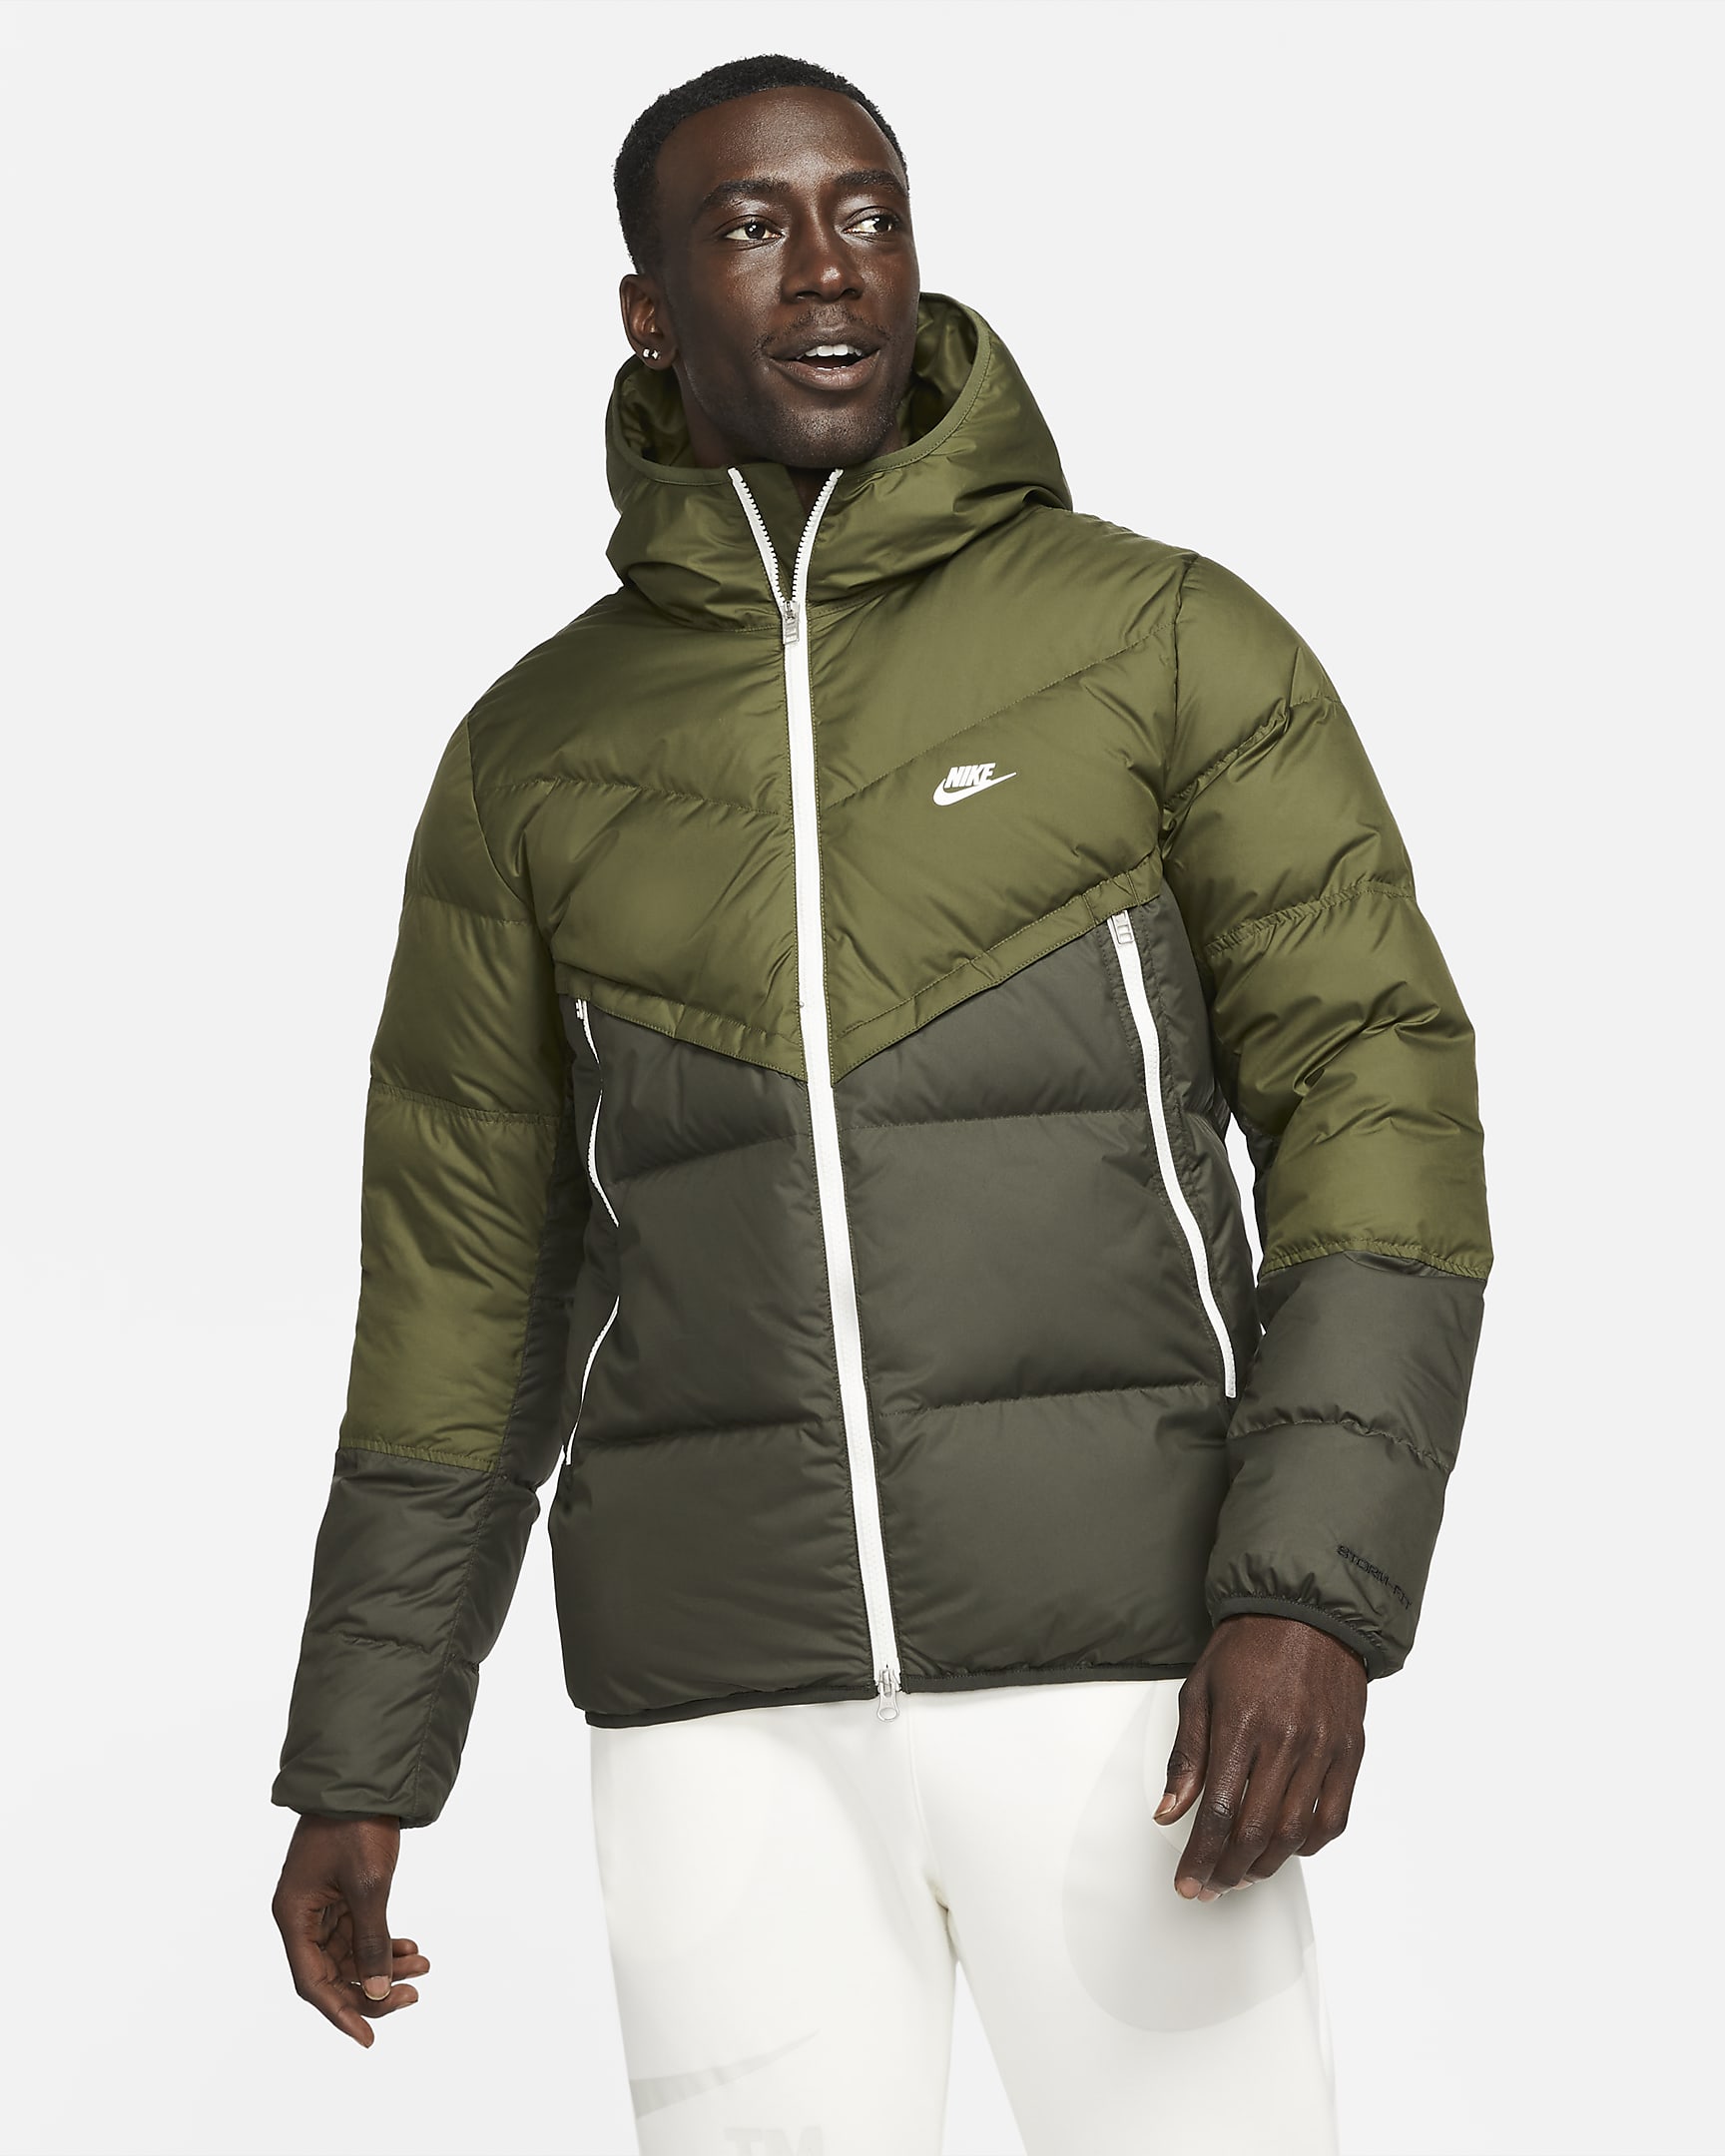 Nike Sportswear Storm-FIT Windrunner Men\'s Hooded Jacket Rough Green/Sequoia/Sail/Sail